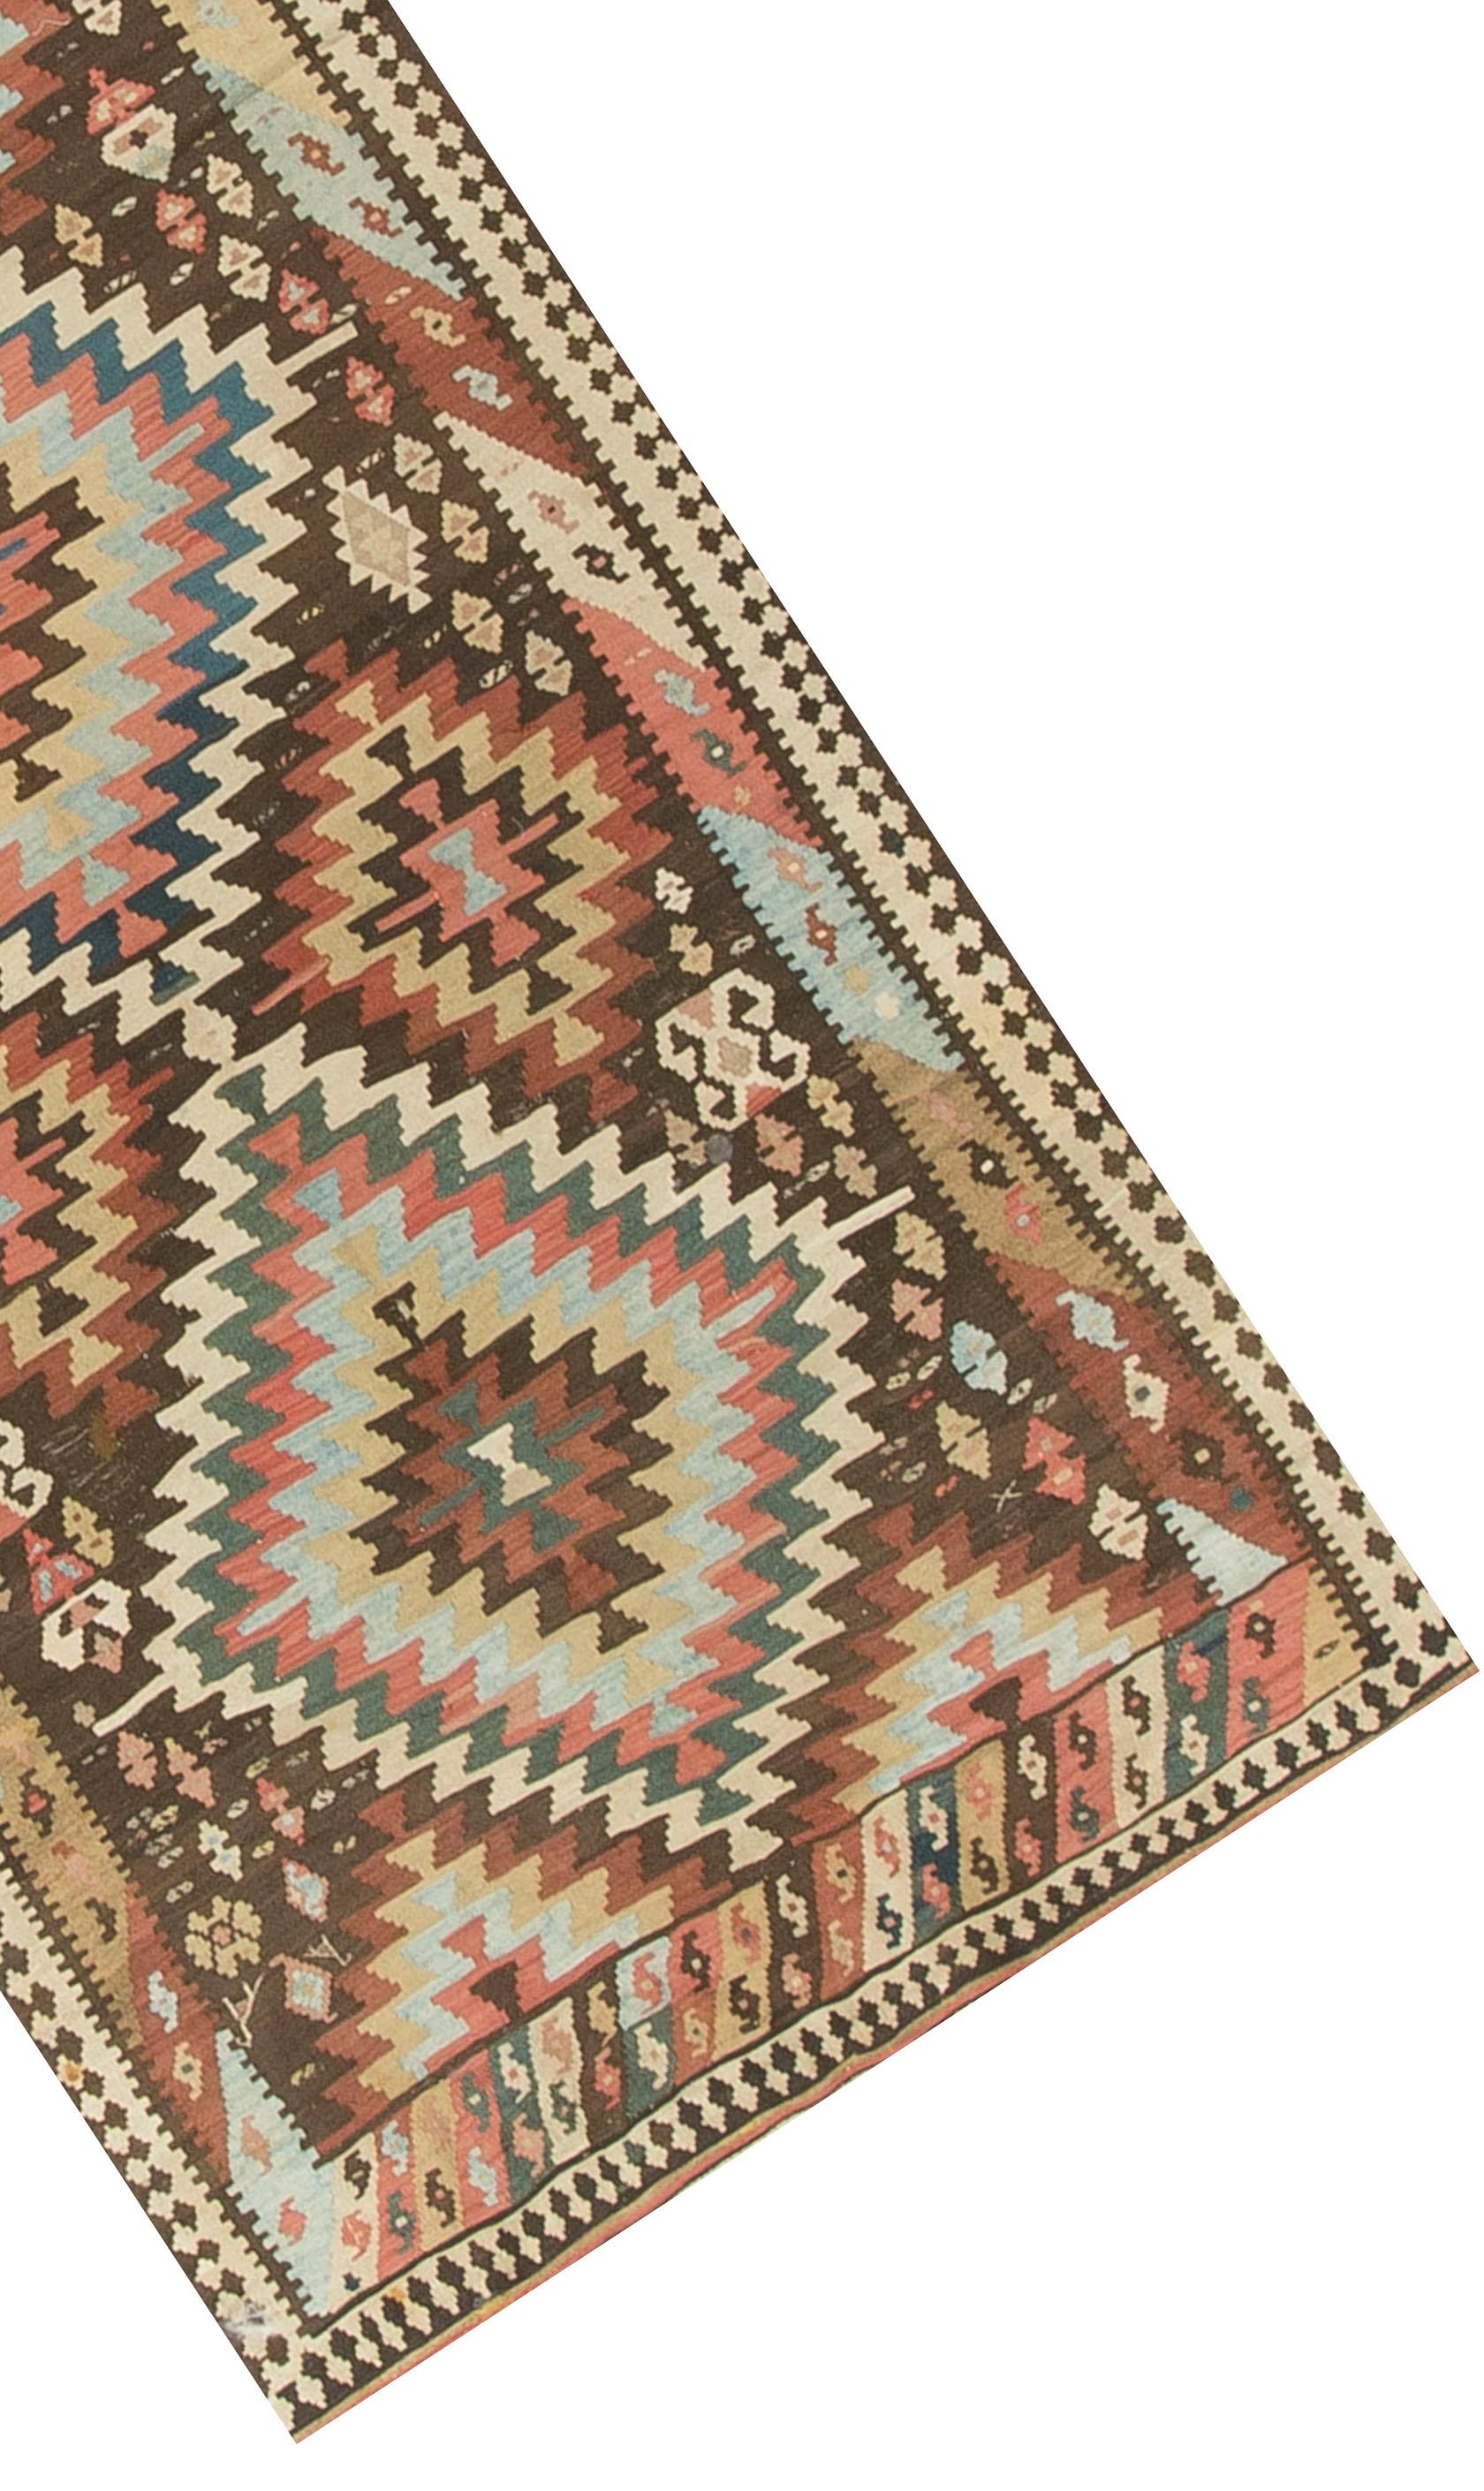 Vintage Persian Kilim circa 1930. A vintage Persian hand woven Kilim that although it has a traditional design has a modern feel today. Size: 5'1 x 9'9